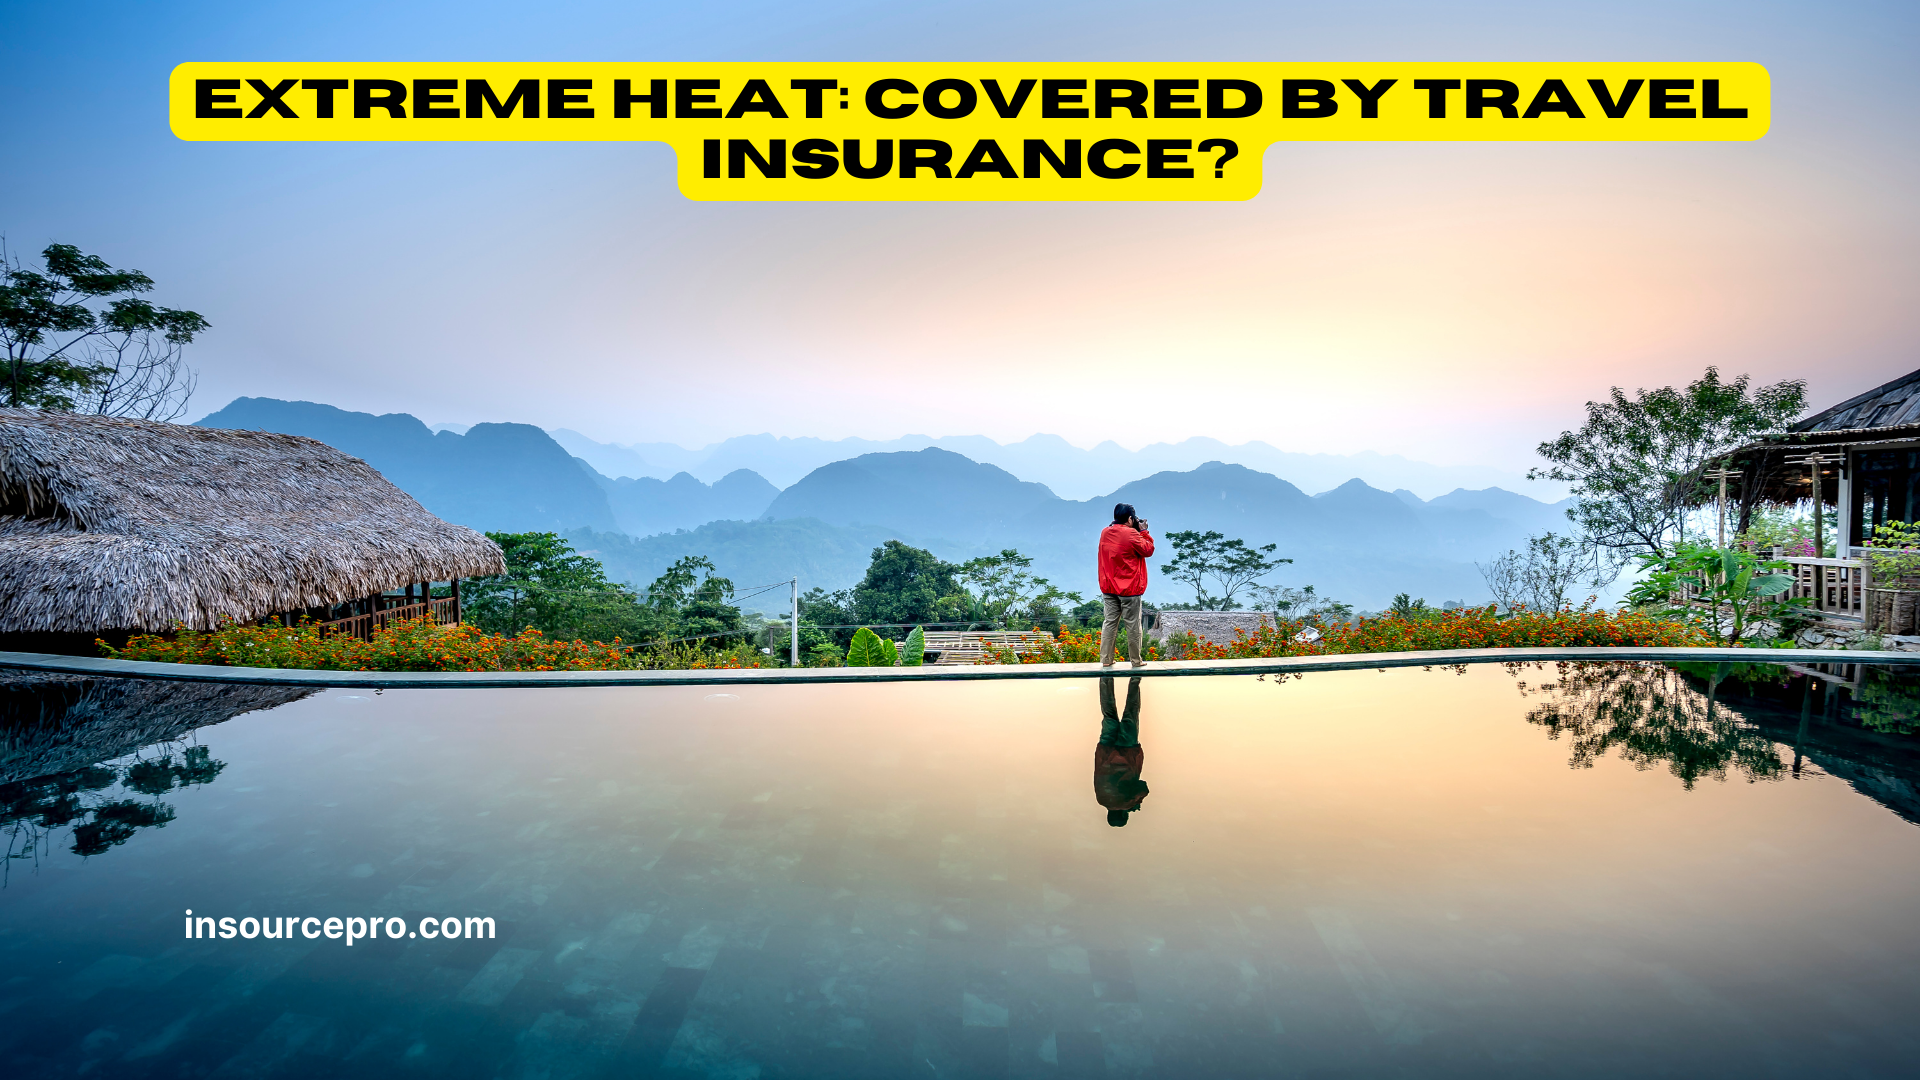 Extreme Heat: Covered by Travel Insurance?